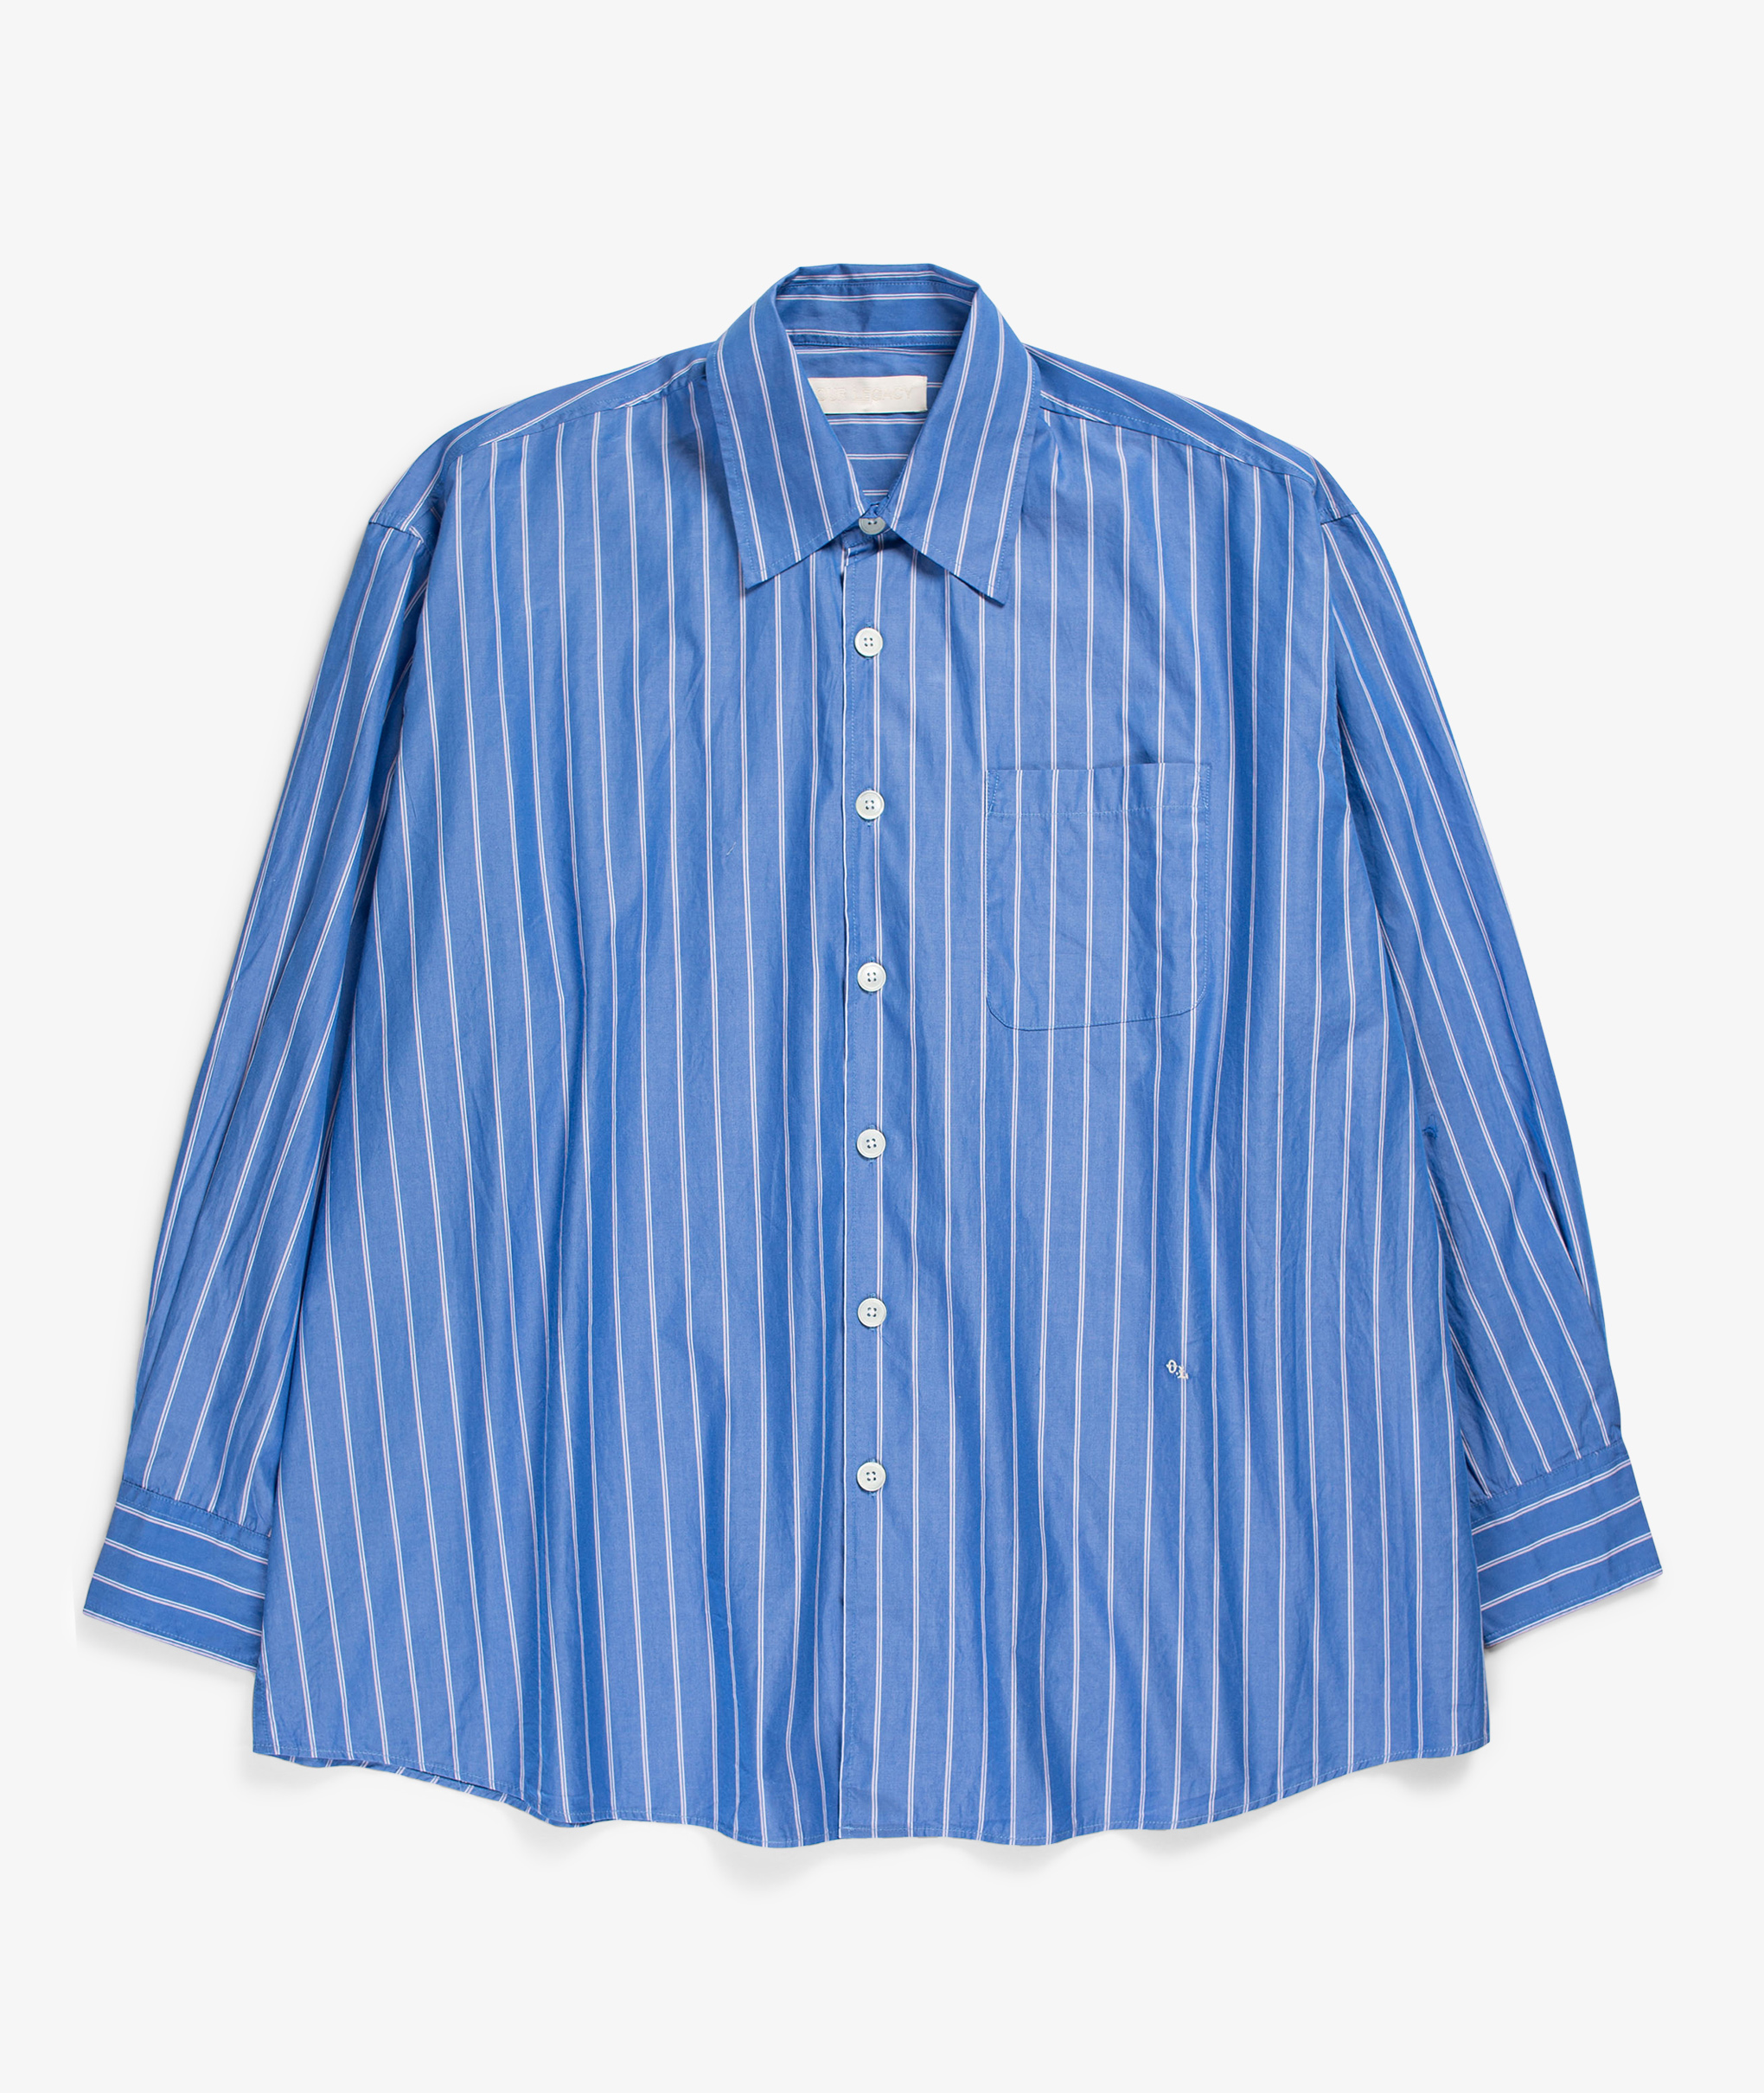 Norse Store | Shipping Worldwide - Our Legacy Borrowed Stripe Shirt - Blue  / White